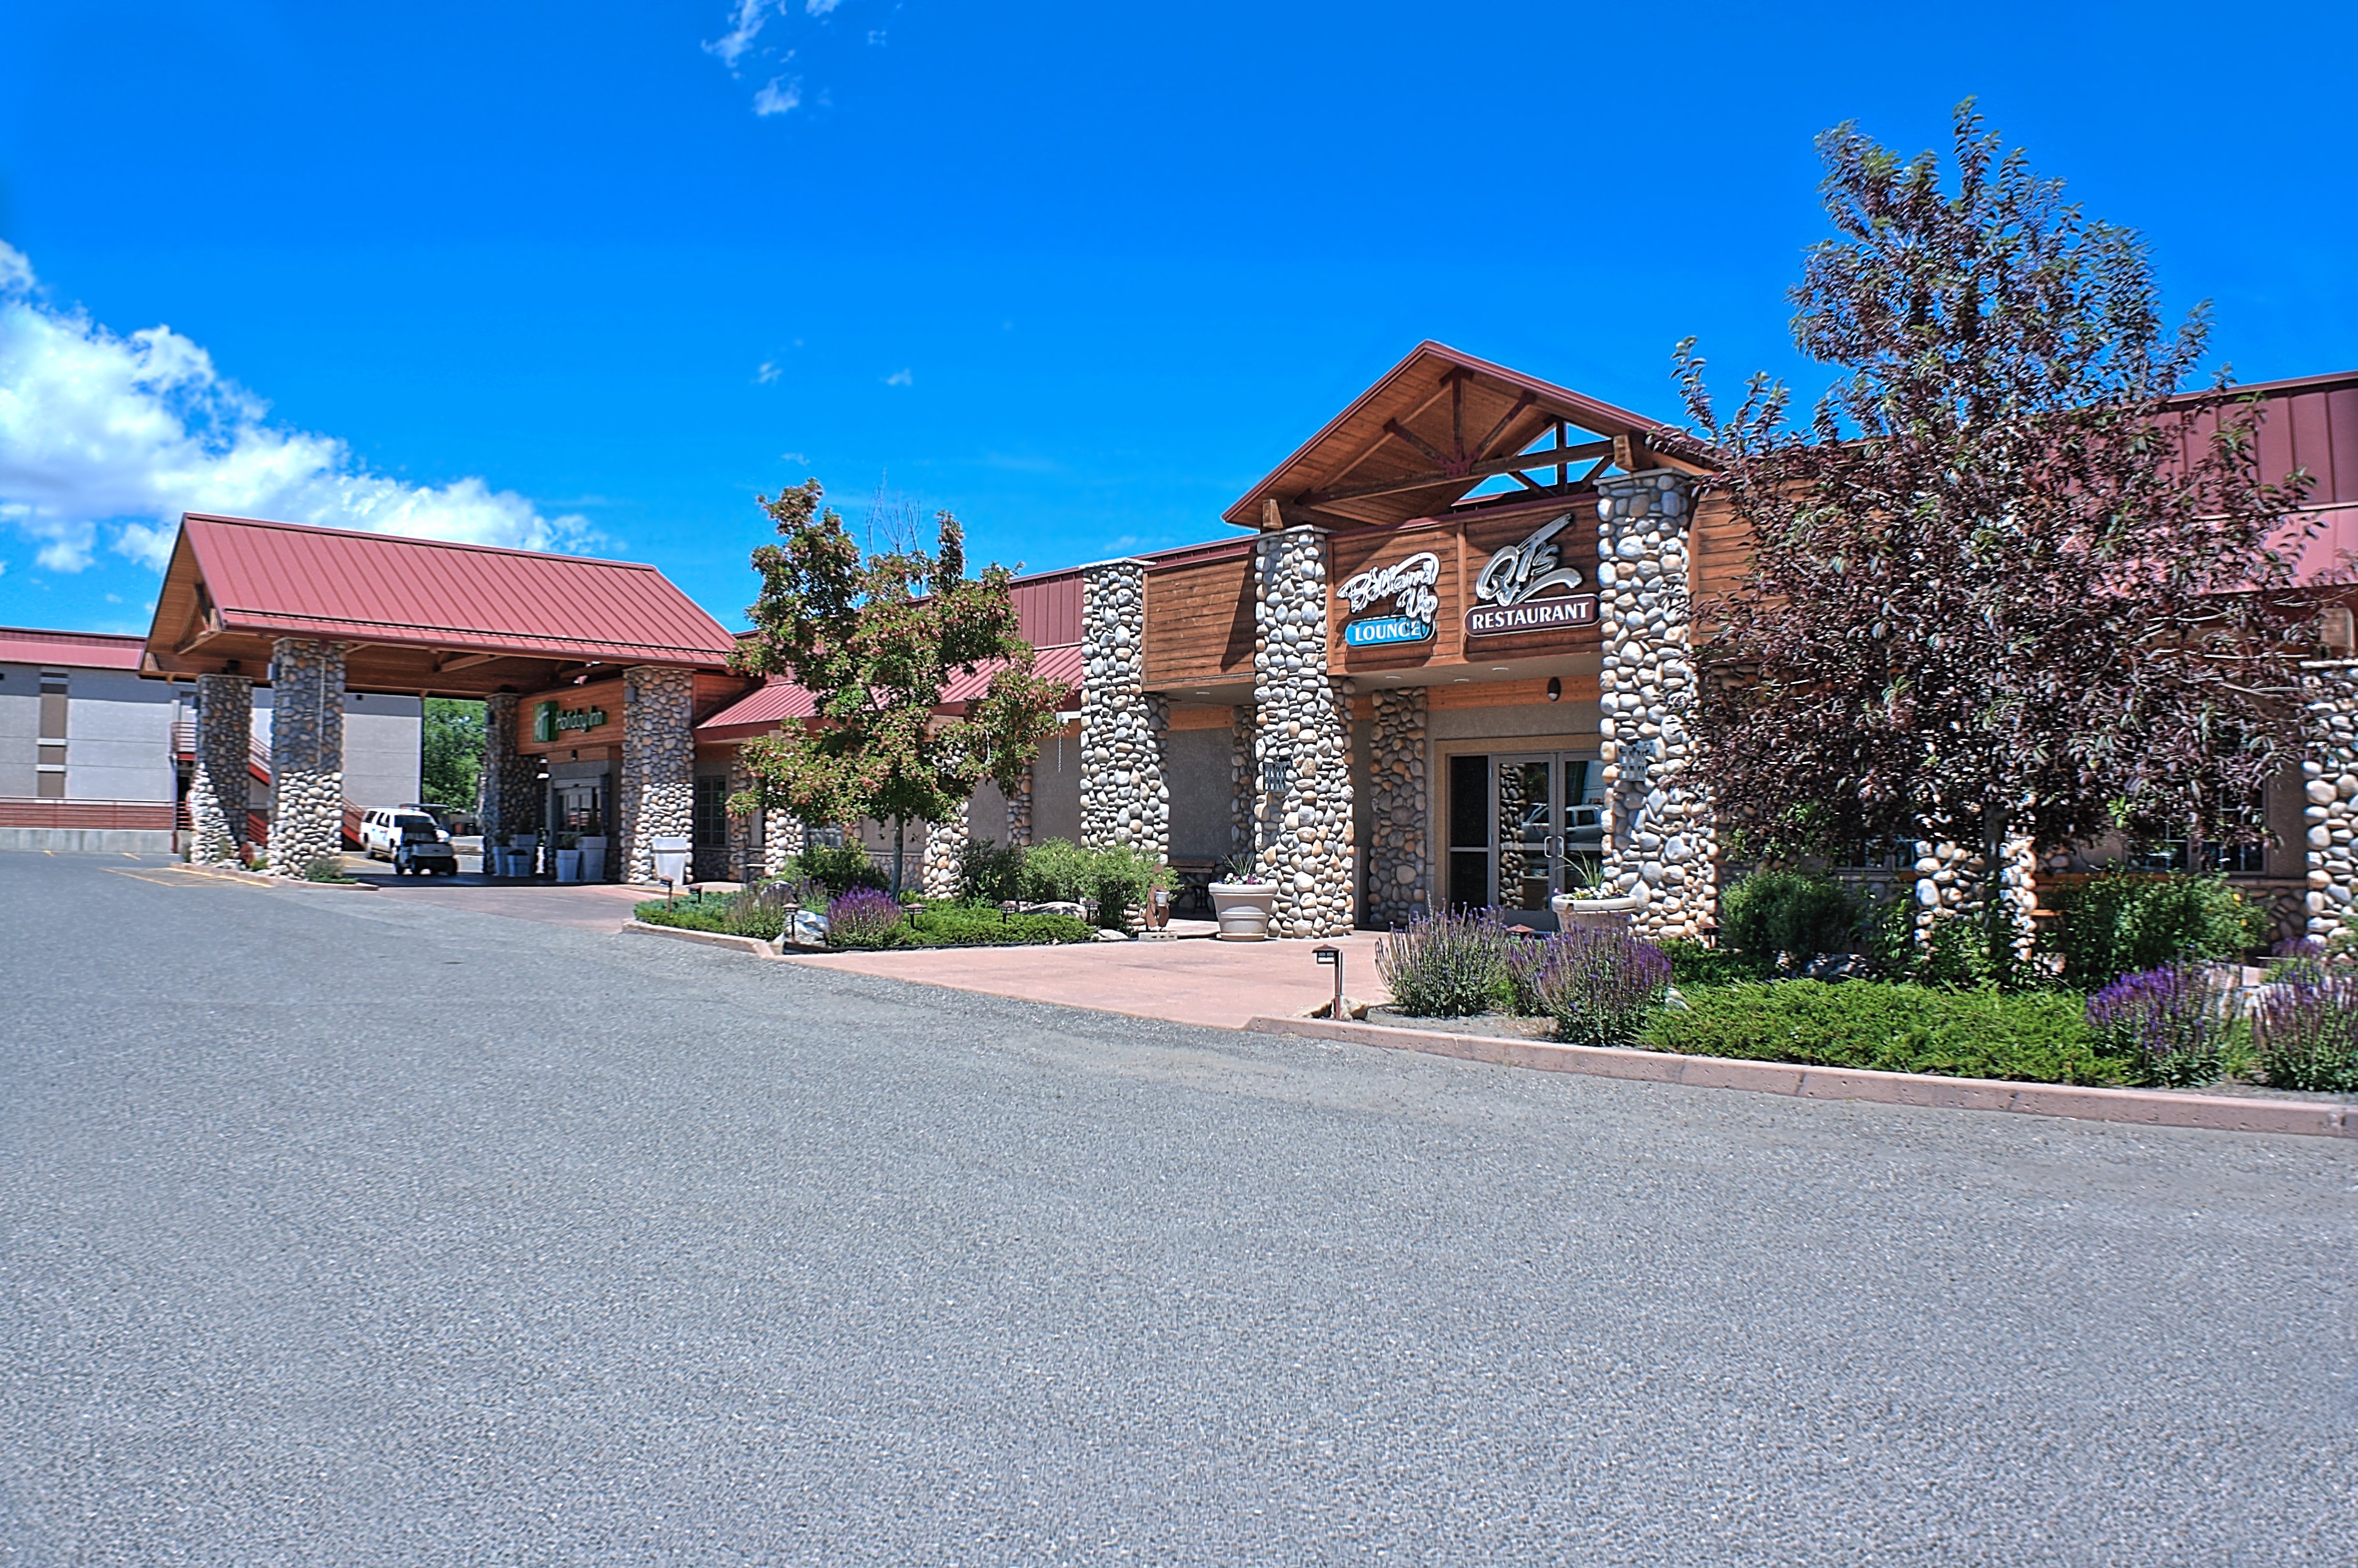 Welcome to Holiday Inn Cody, located downtown Cody, Wyoming